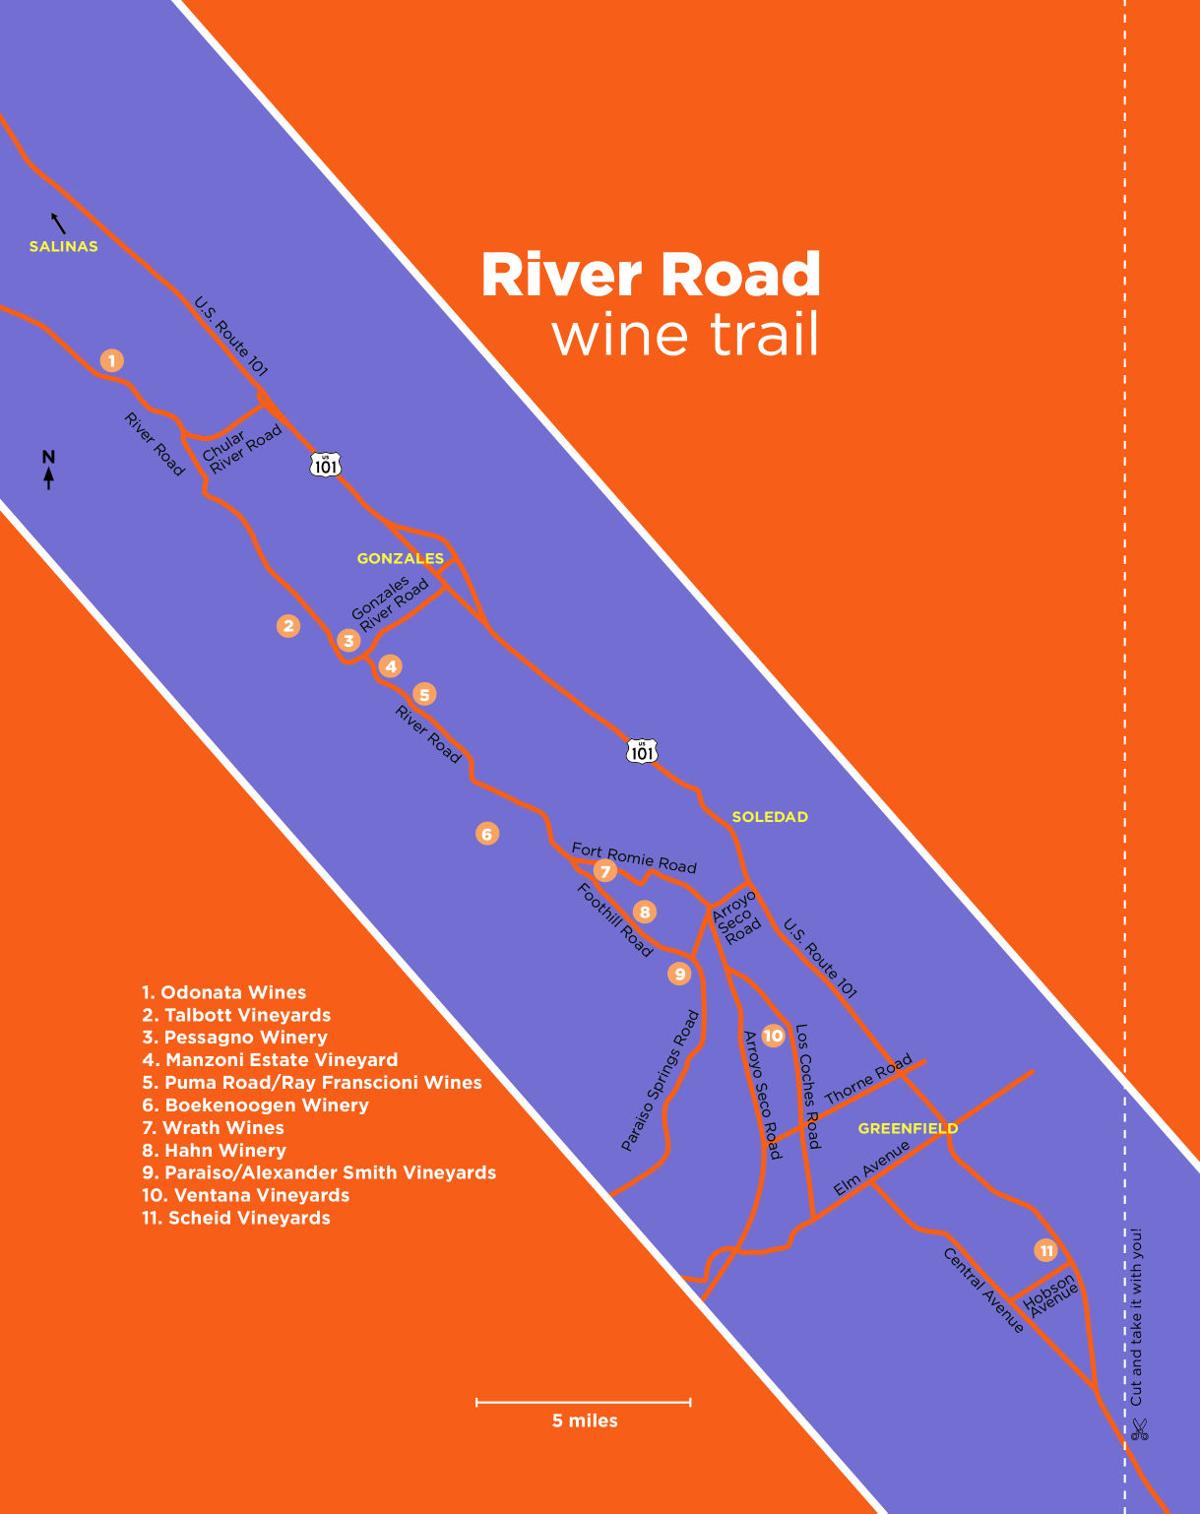 Monterey County wine tasting rooms: The complete River Road trail ...